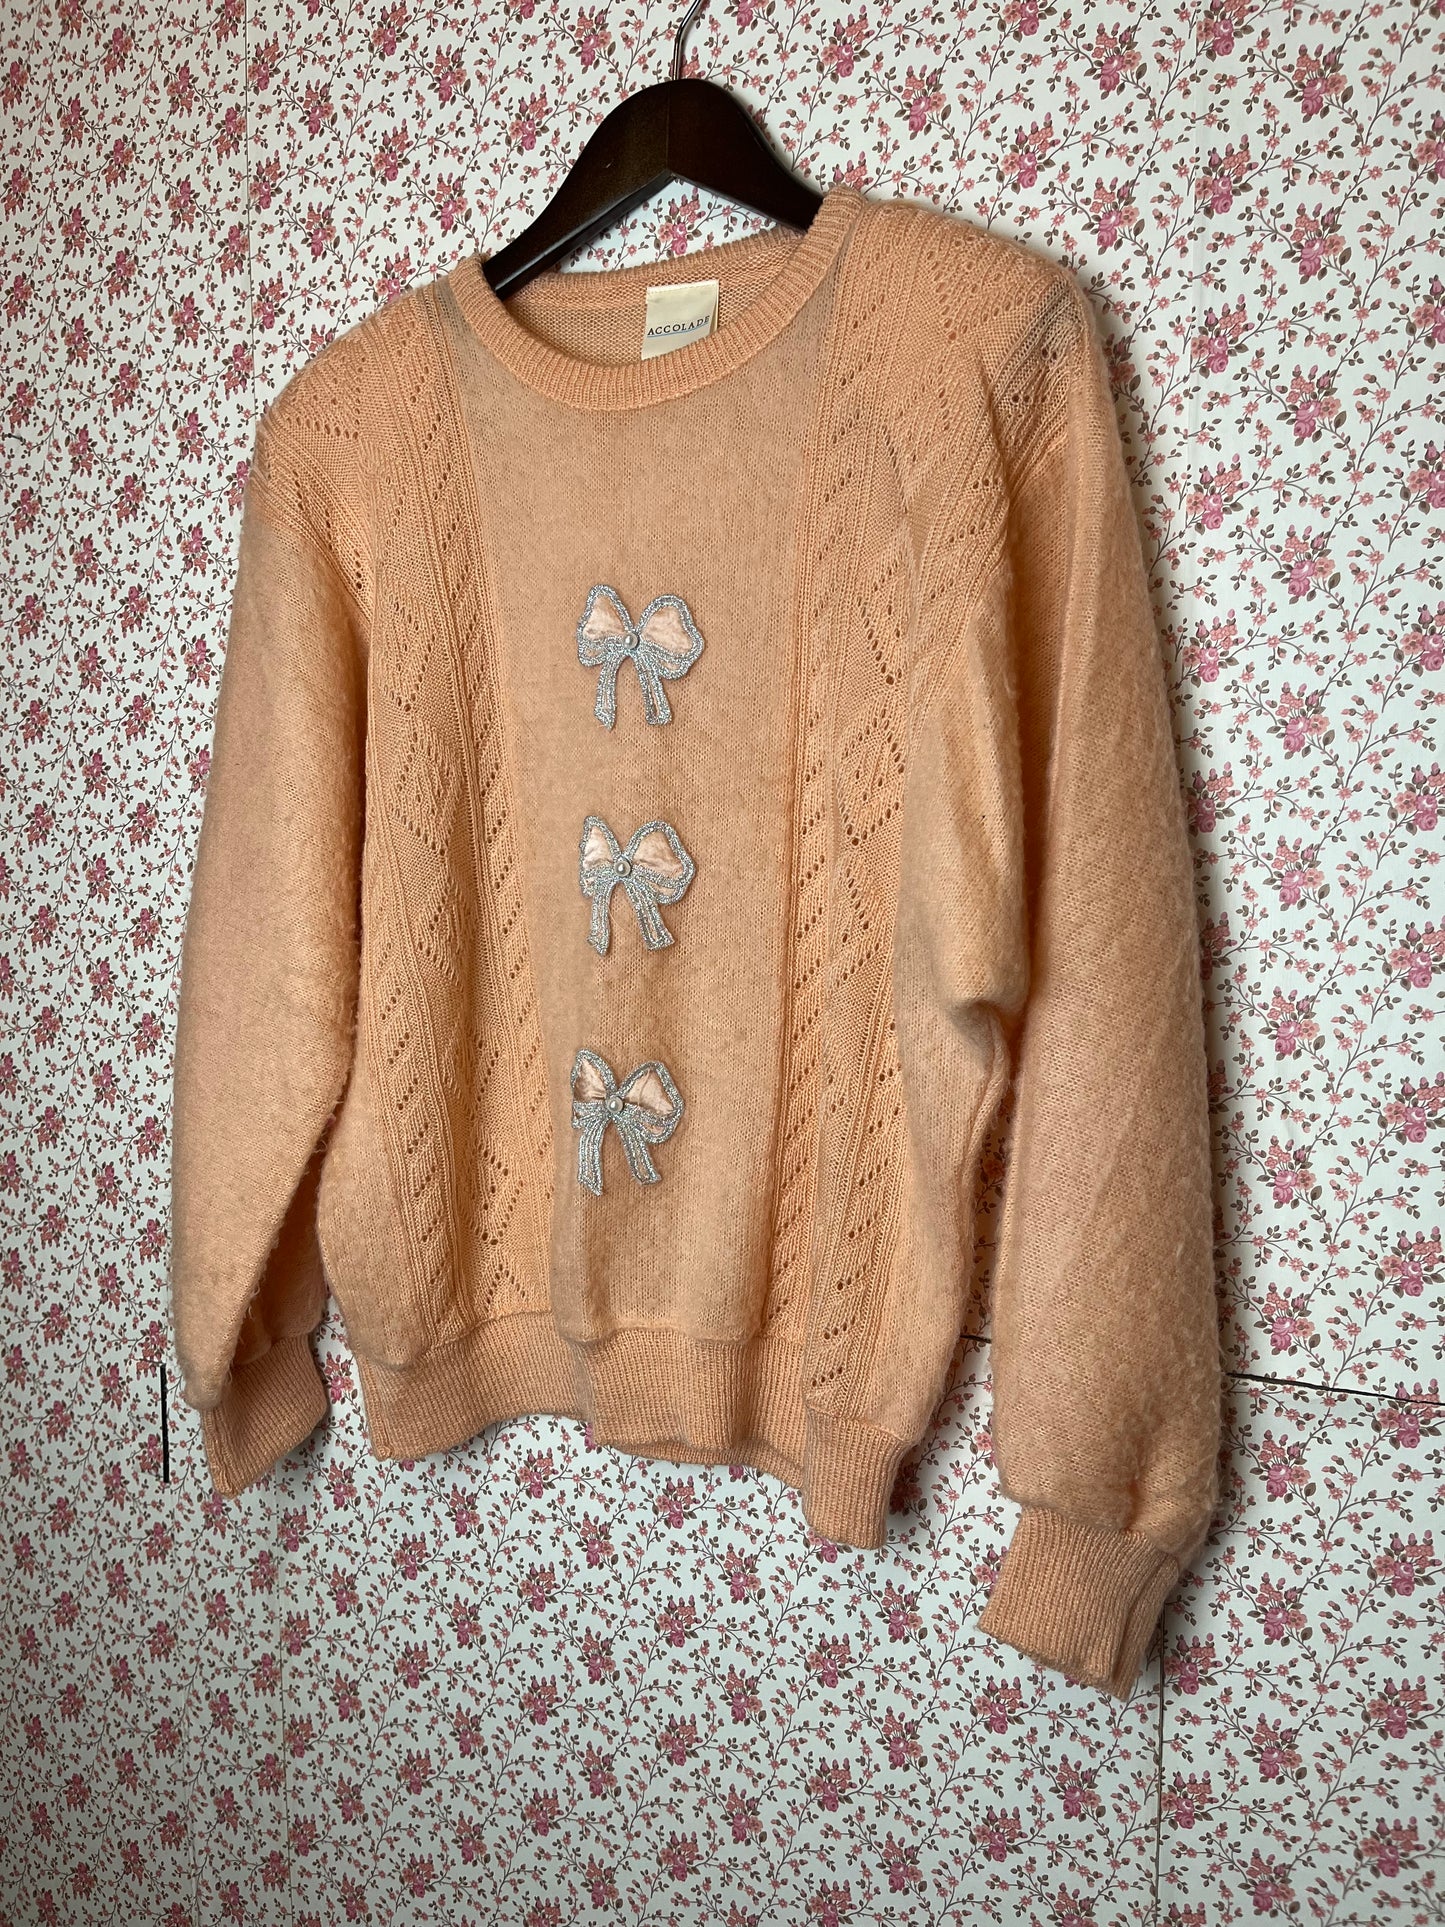 Vintage 1980s Peach Knit Jumper with Bows